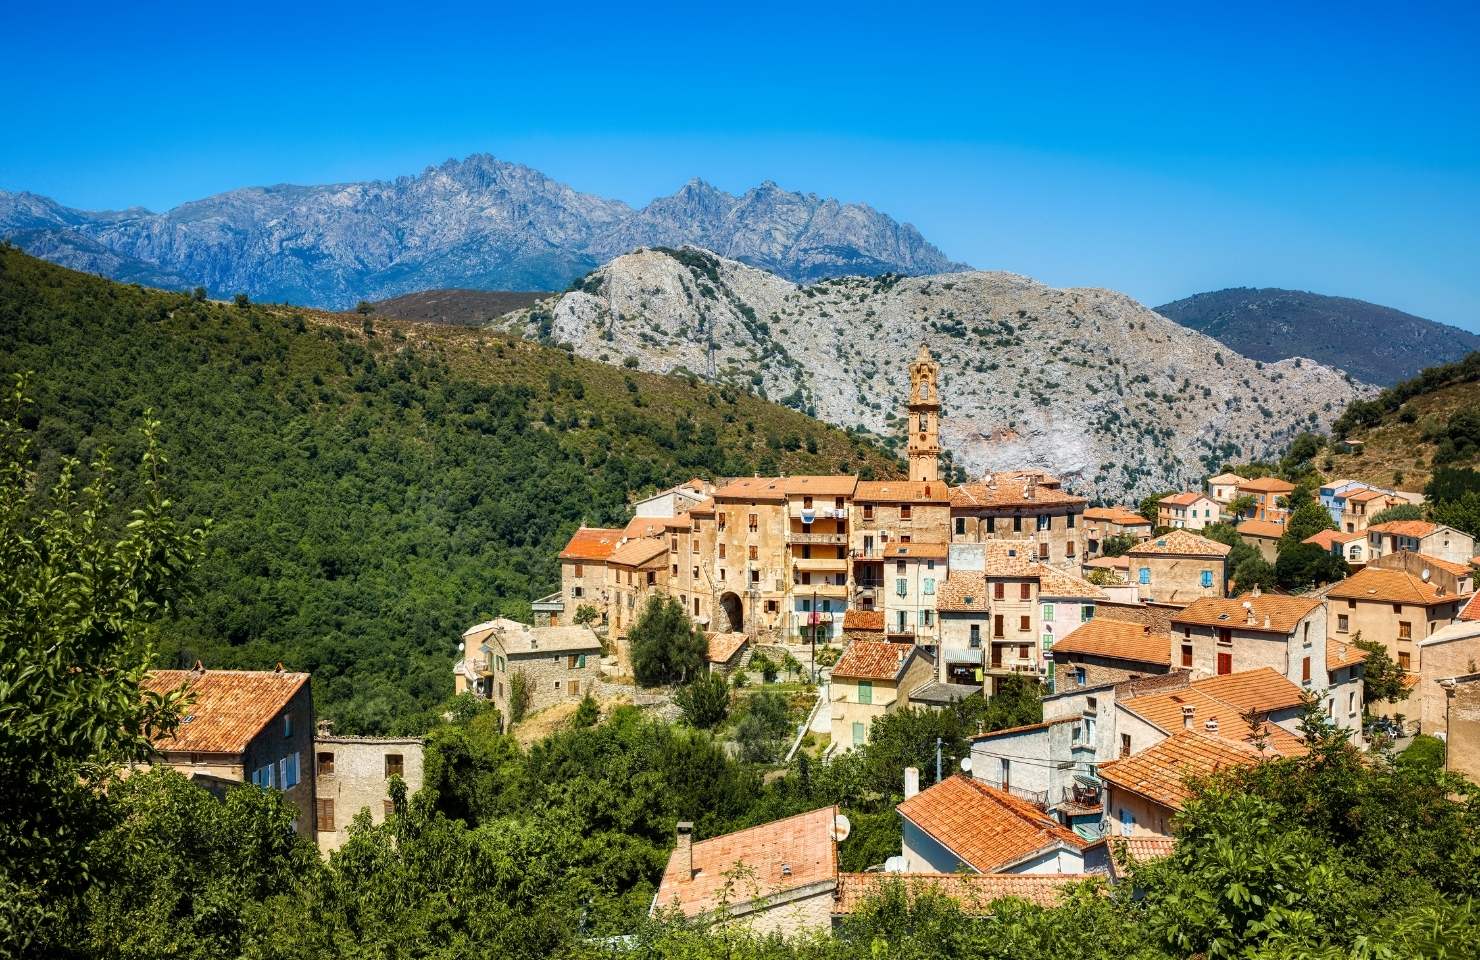 moutain, town, blue sky in corsica